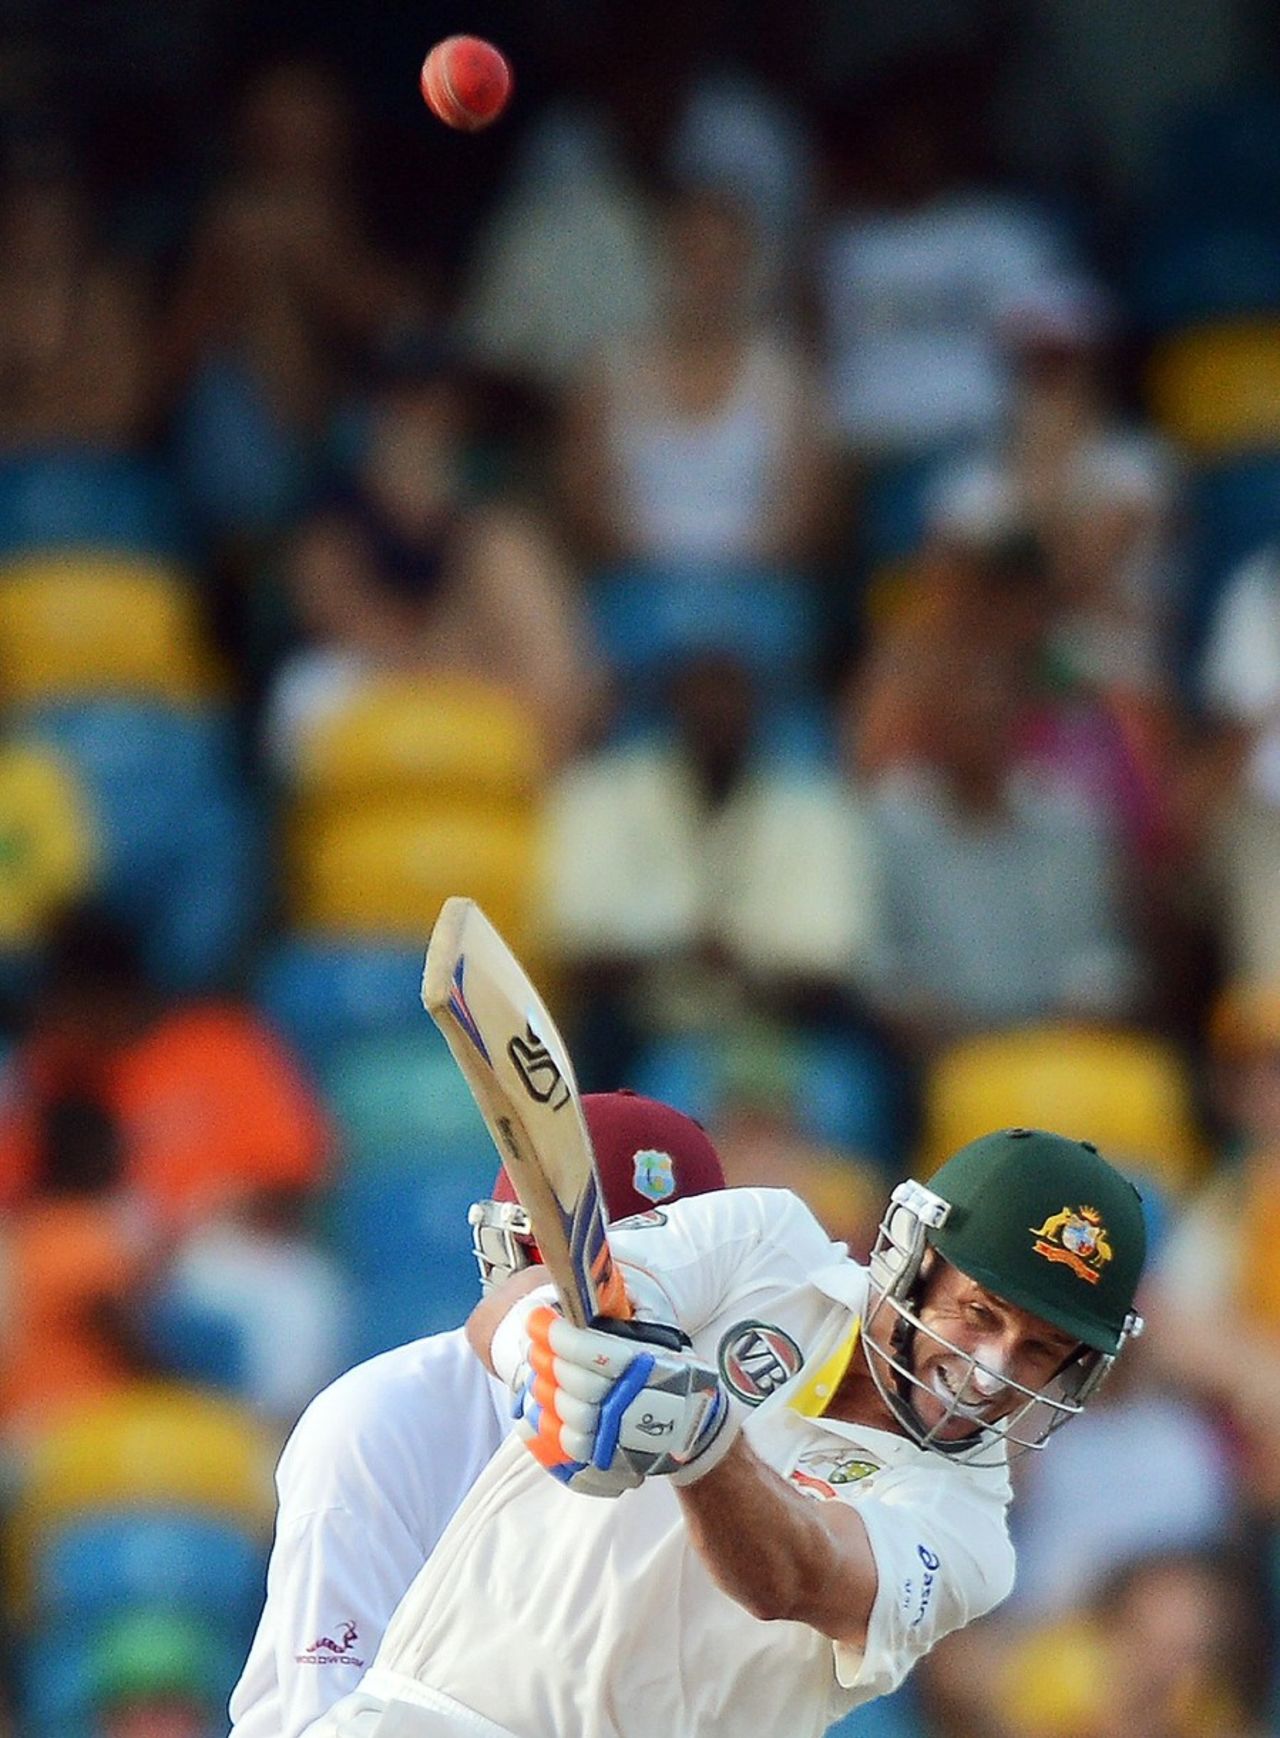 Michael Hussey launches a six down the ground, West Indies v Australia, 1st Test, Barbados, 5th day, April 11, 2012